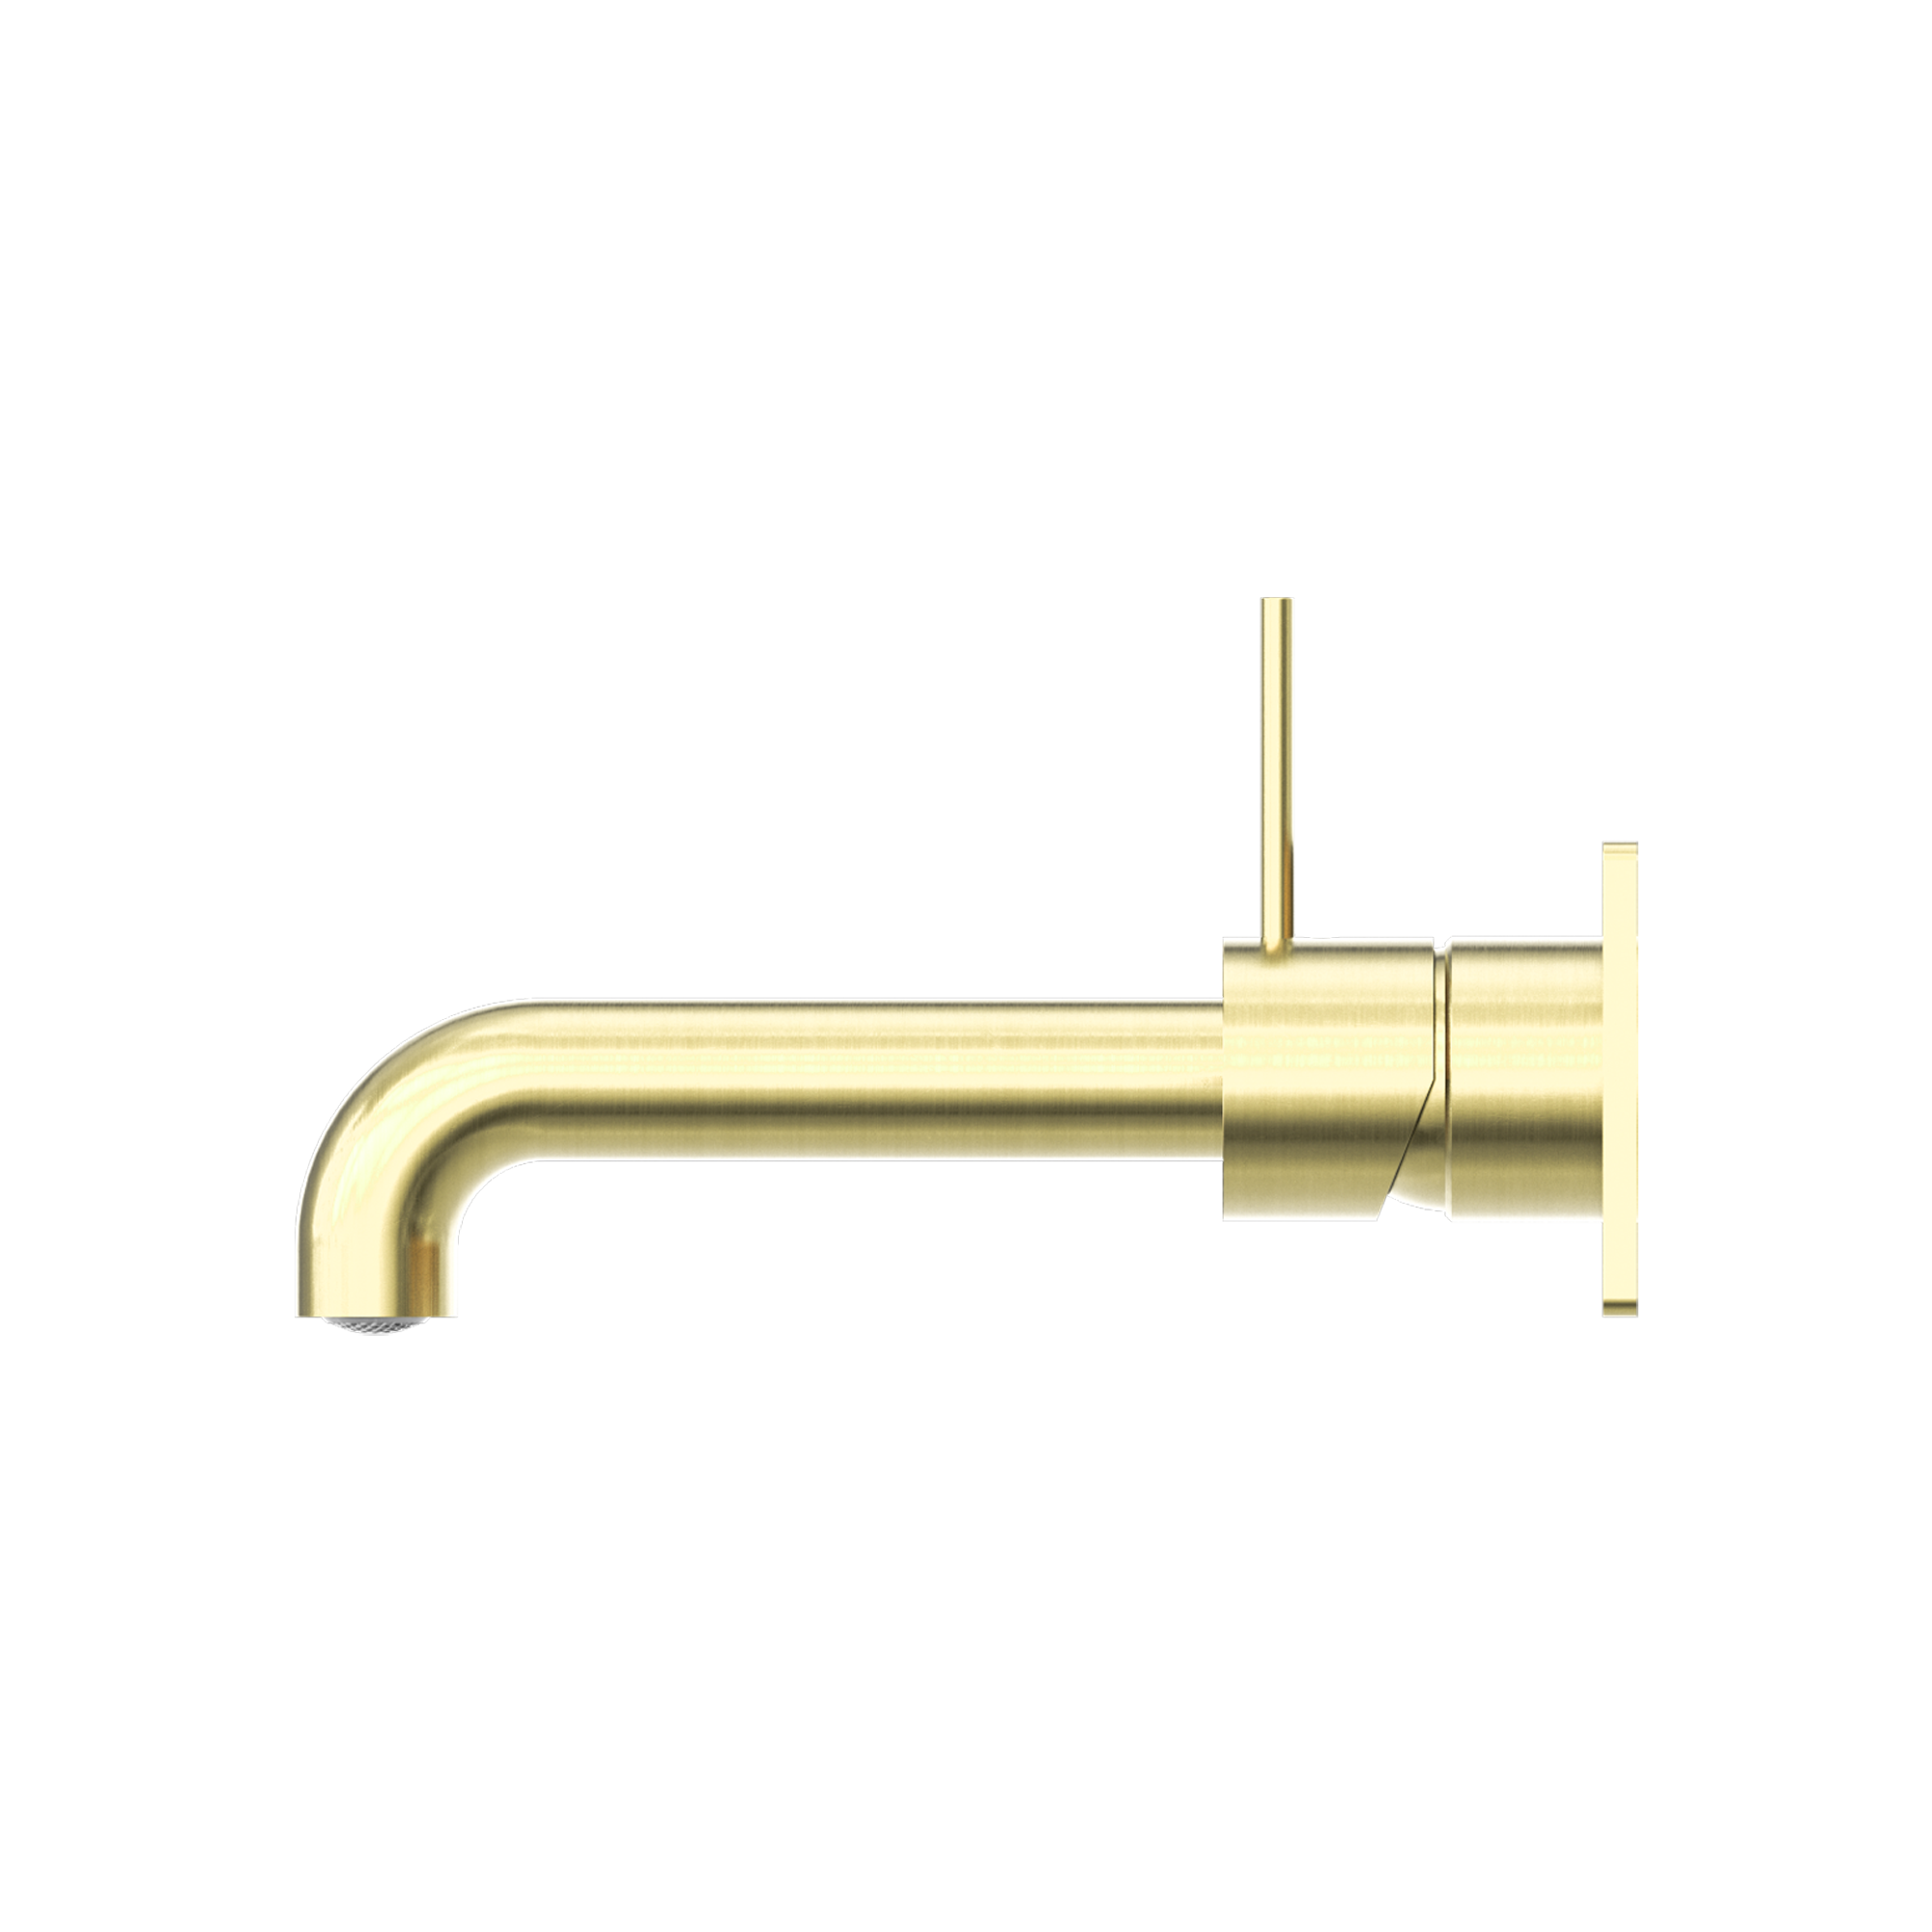 NERO MECCA WALL BASIN/BATH MIXER HANDLE UP BRUSHED GOLD (AVAILABLE IN 120MM,160MM,185MM, 230MM AND 260MM)